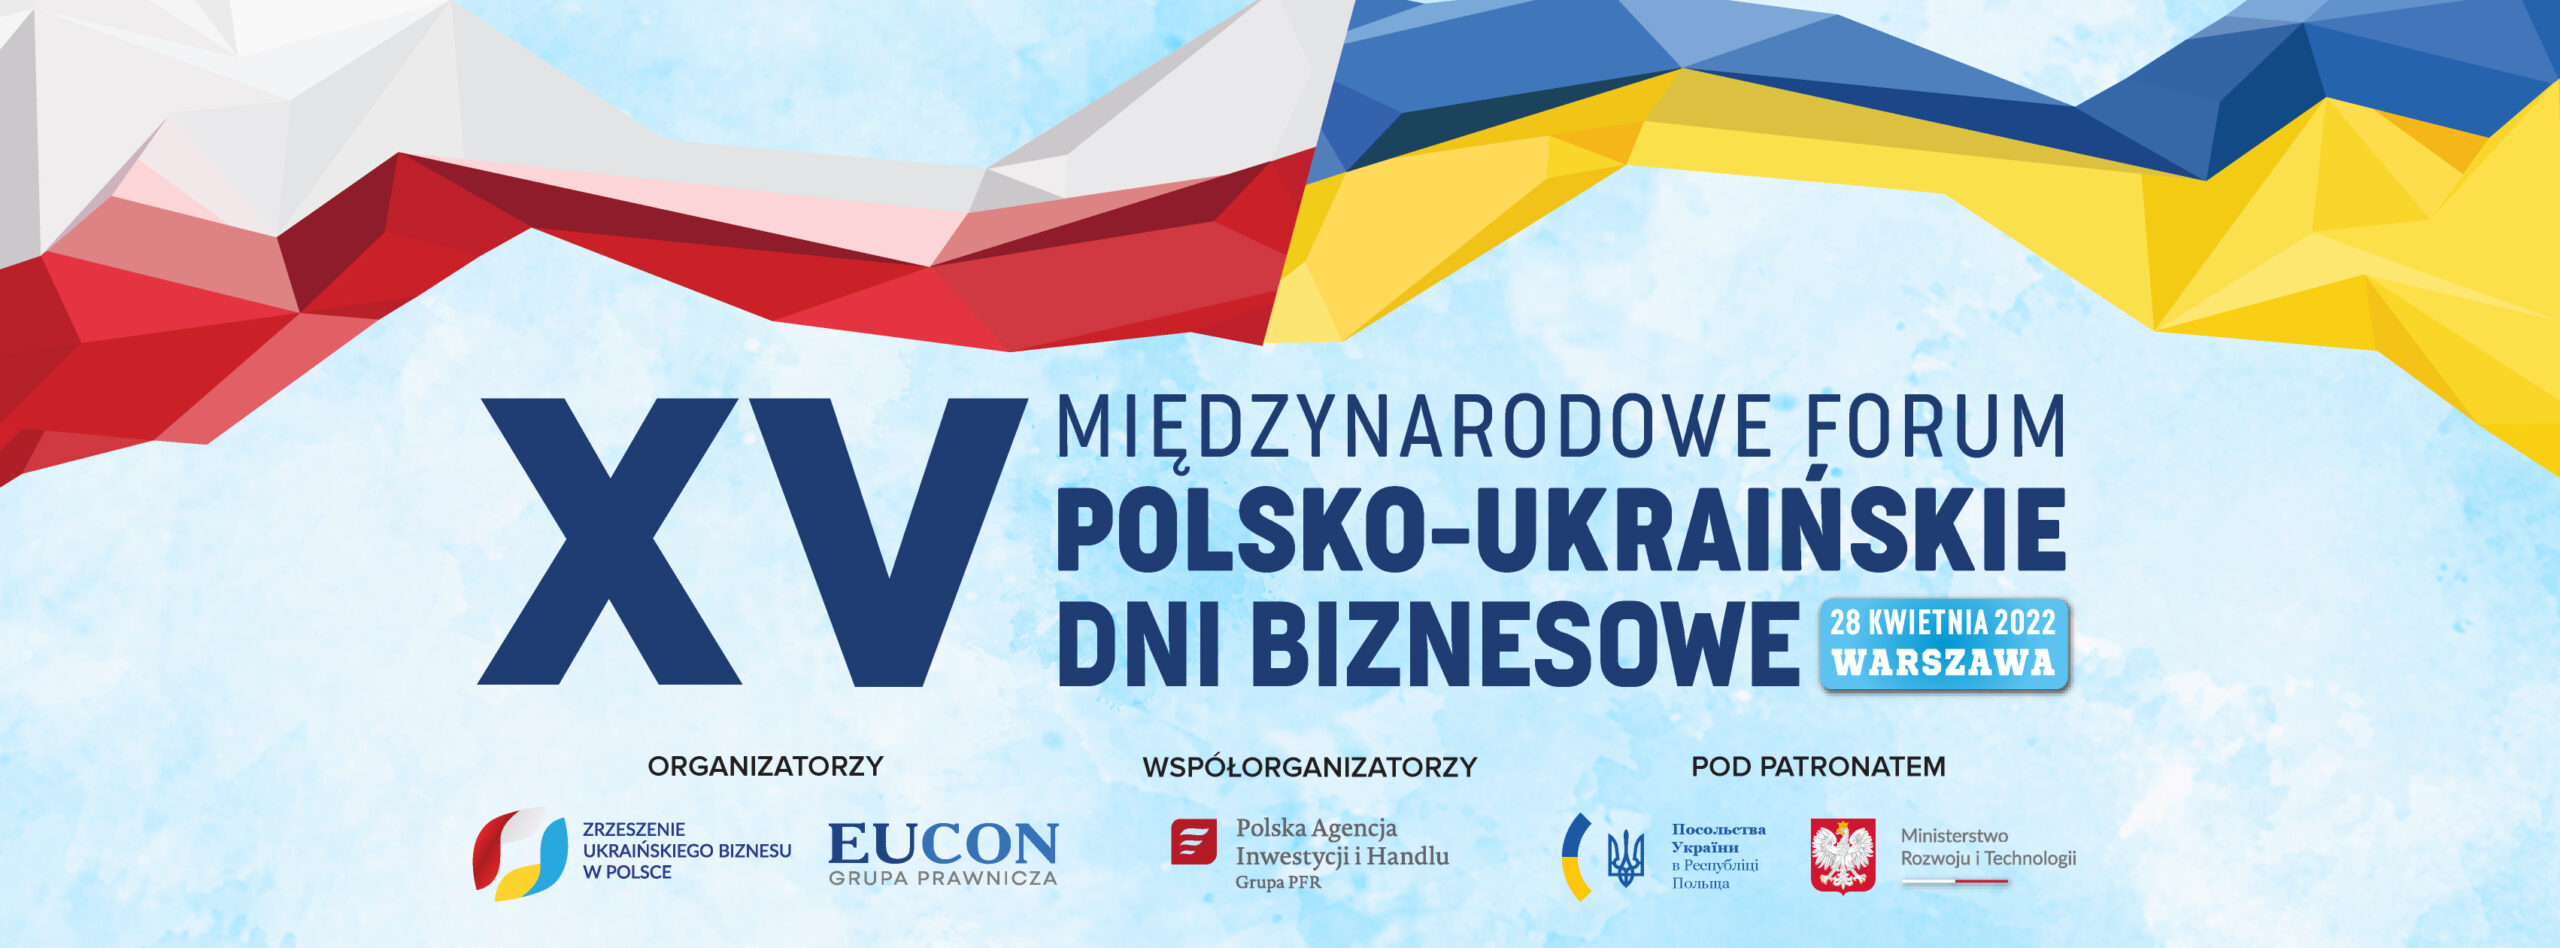 Ukraine’s great recovery after winning the war against the Russian occupiers: The 15th anniversary International Forum “Polish-Ukrainian Business Days” to be held in Warsaw on 28 April